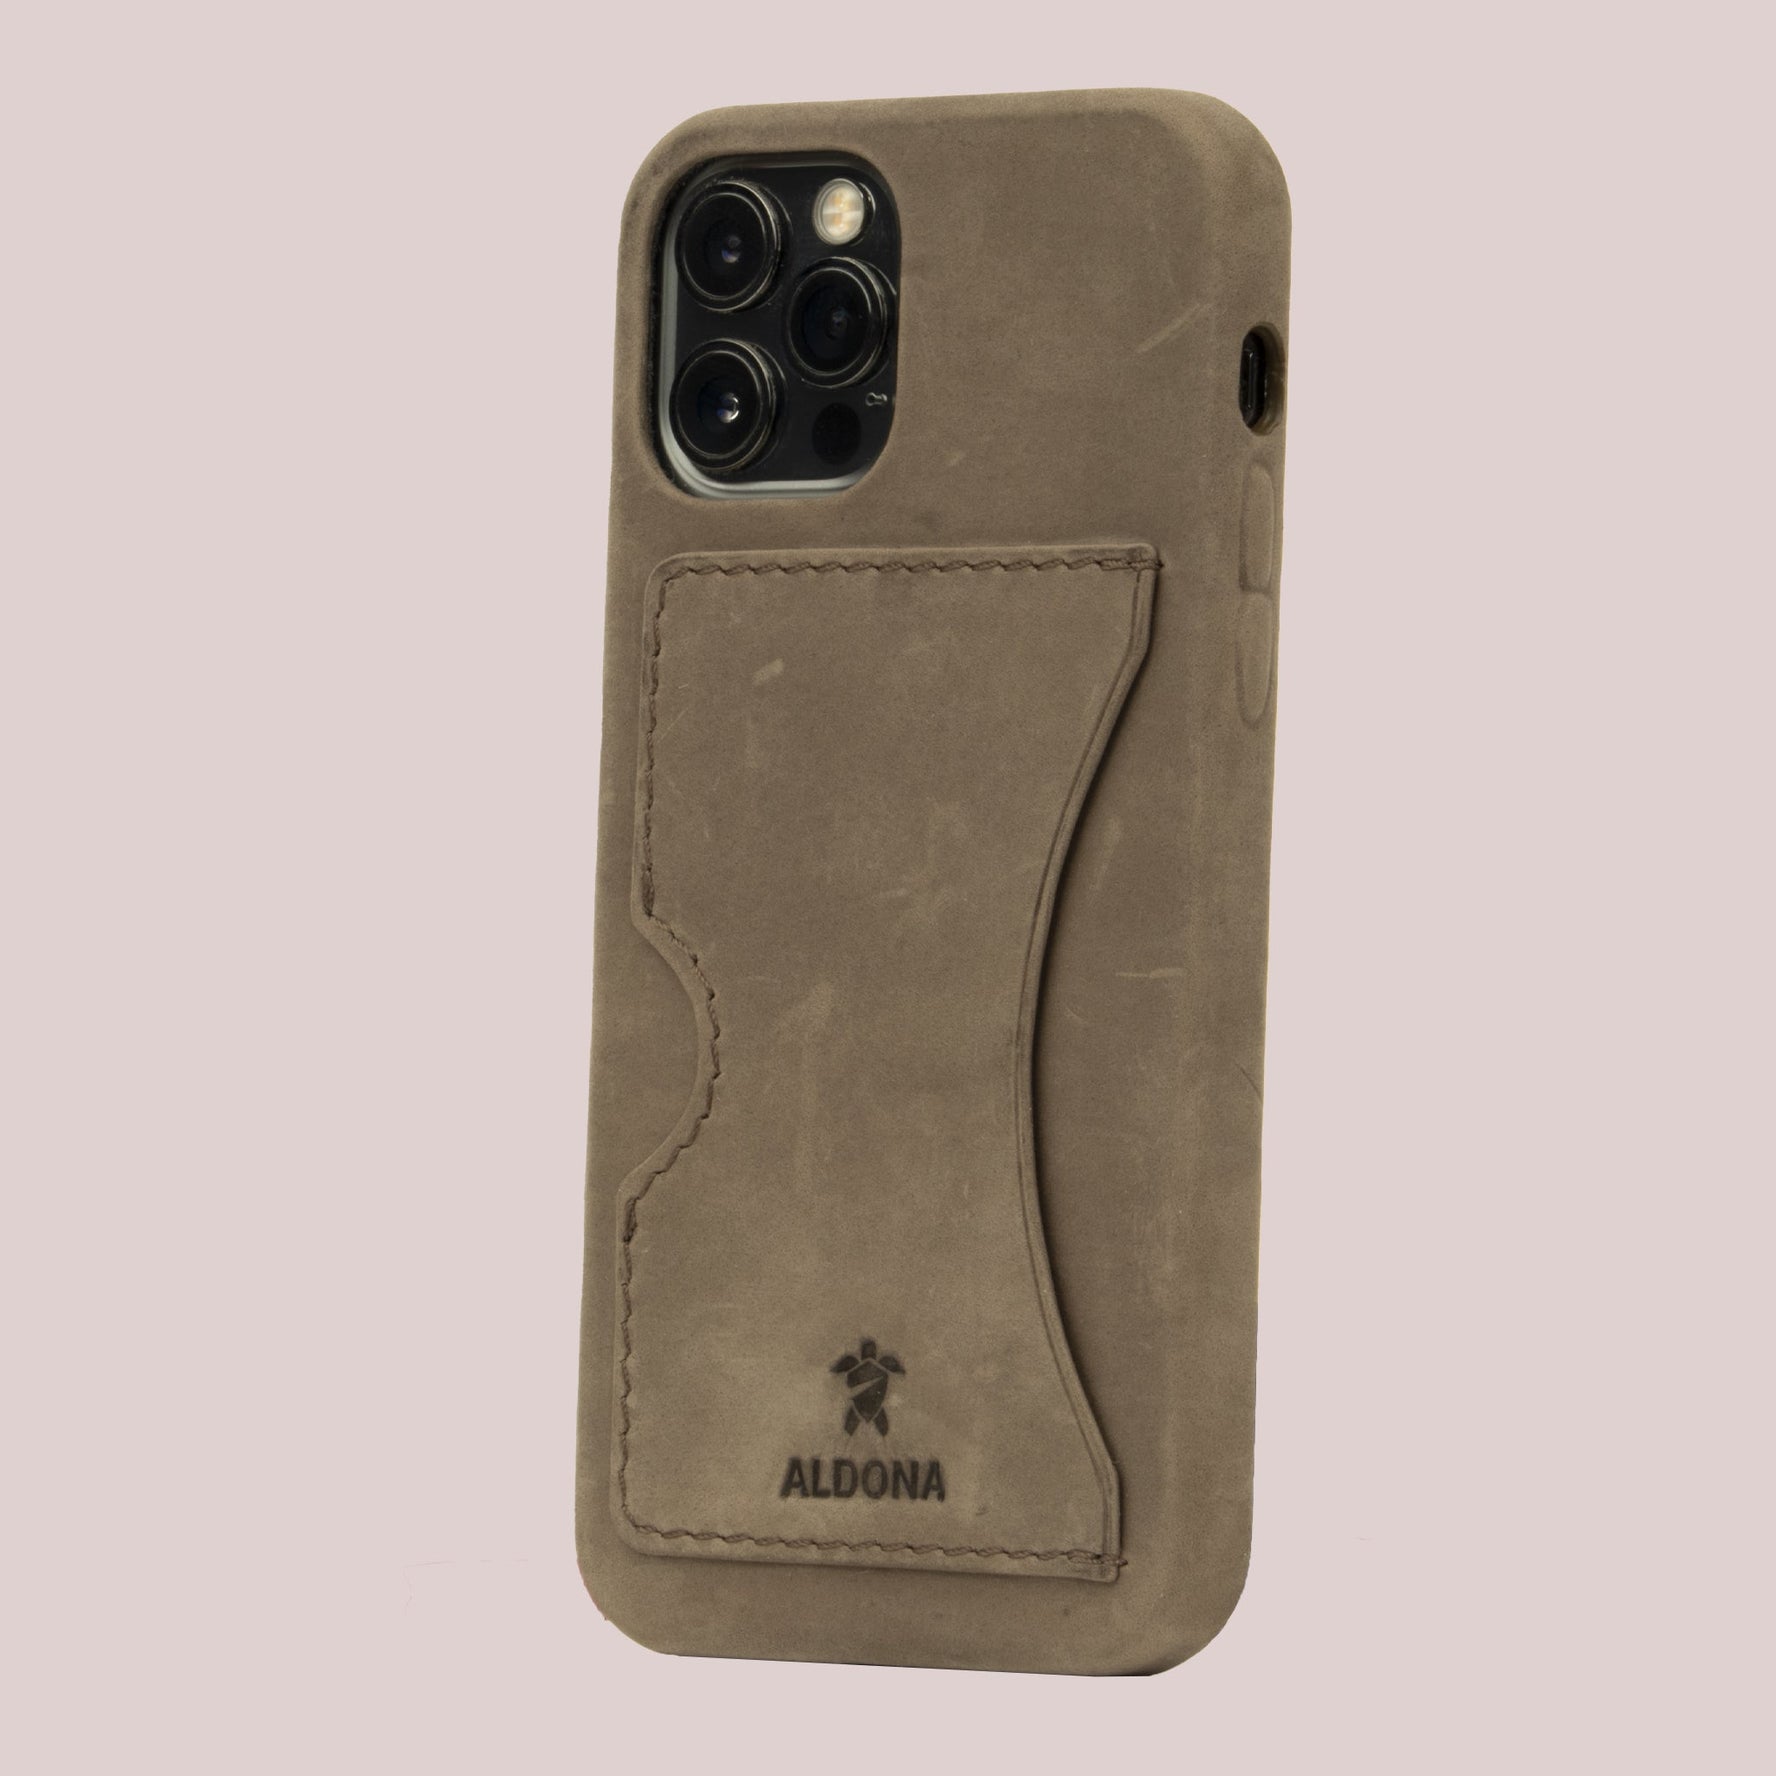 Baxter Card Case for iPhone 14 Pro Max - Burnt Tobacco